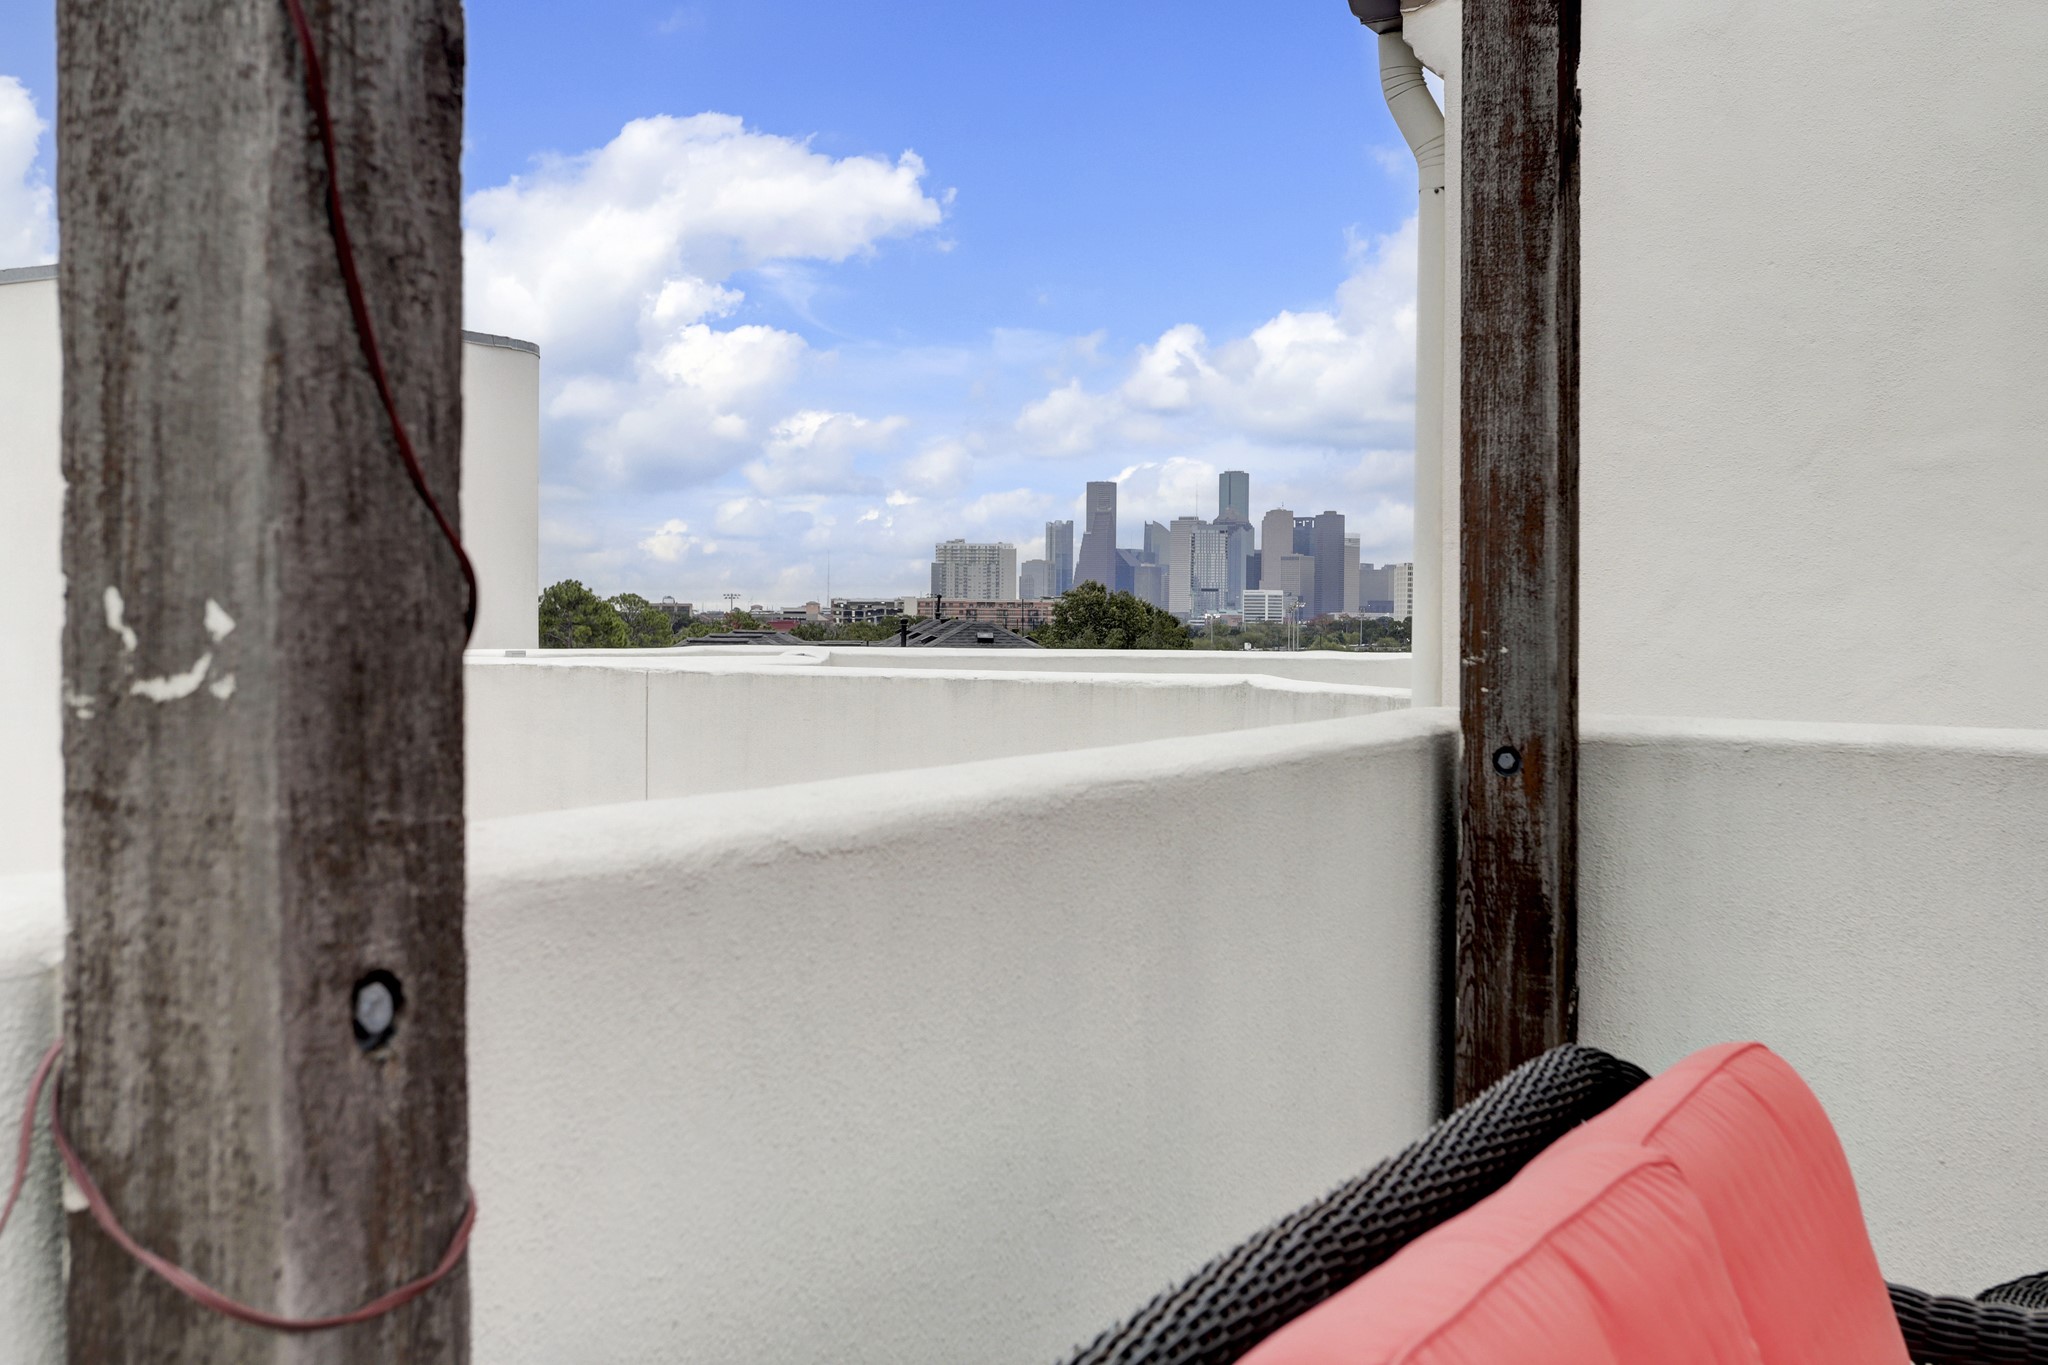 More scenic partial downtown views await you as you host guests or relax on your upstairs patio.